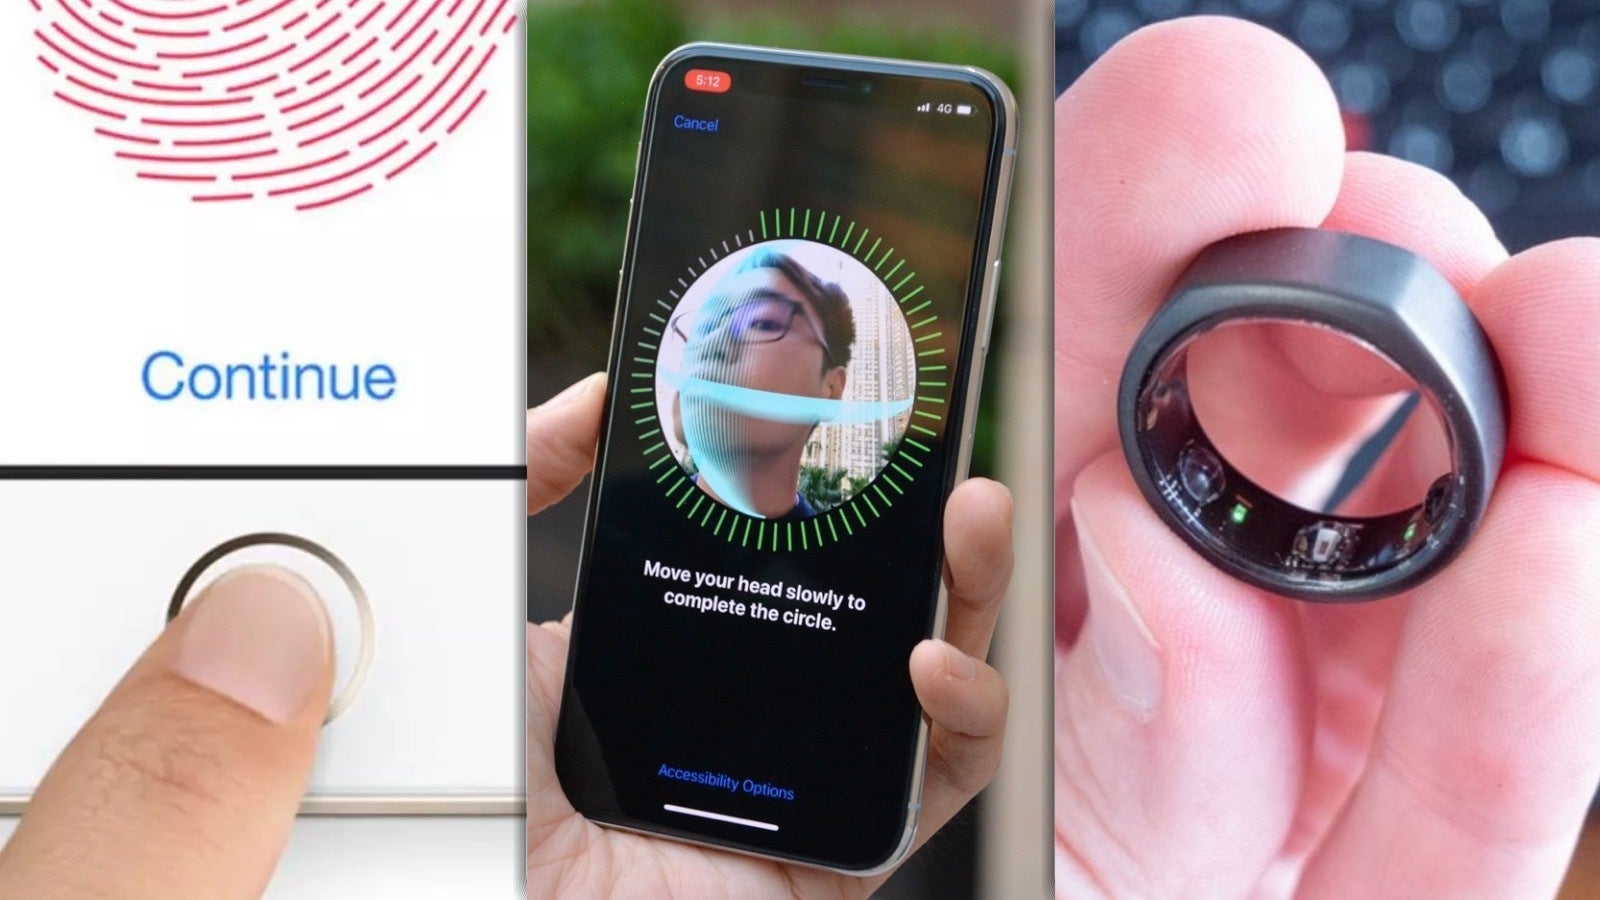 Face ID out, “Apple Ring” in! Google might hold the secret to the next huge iPhone innovation?